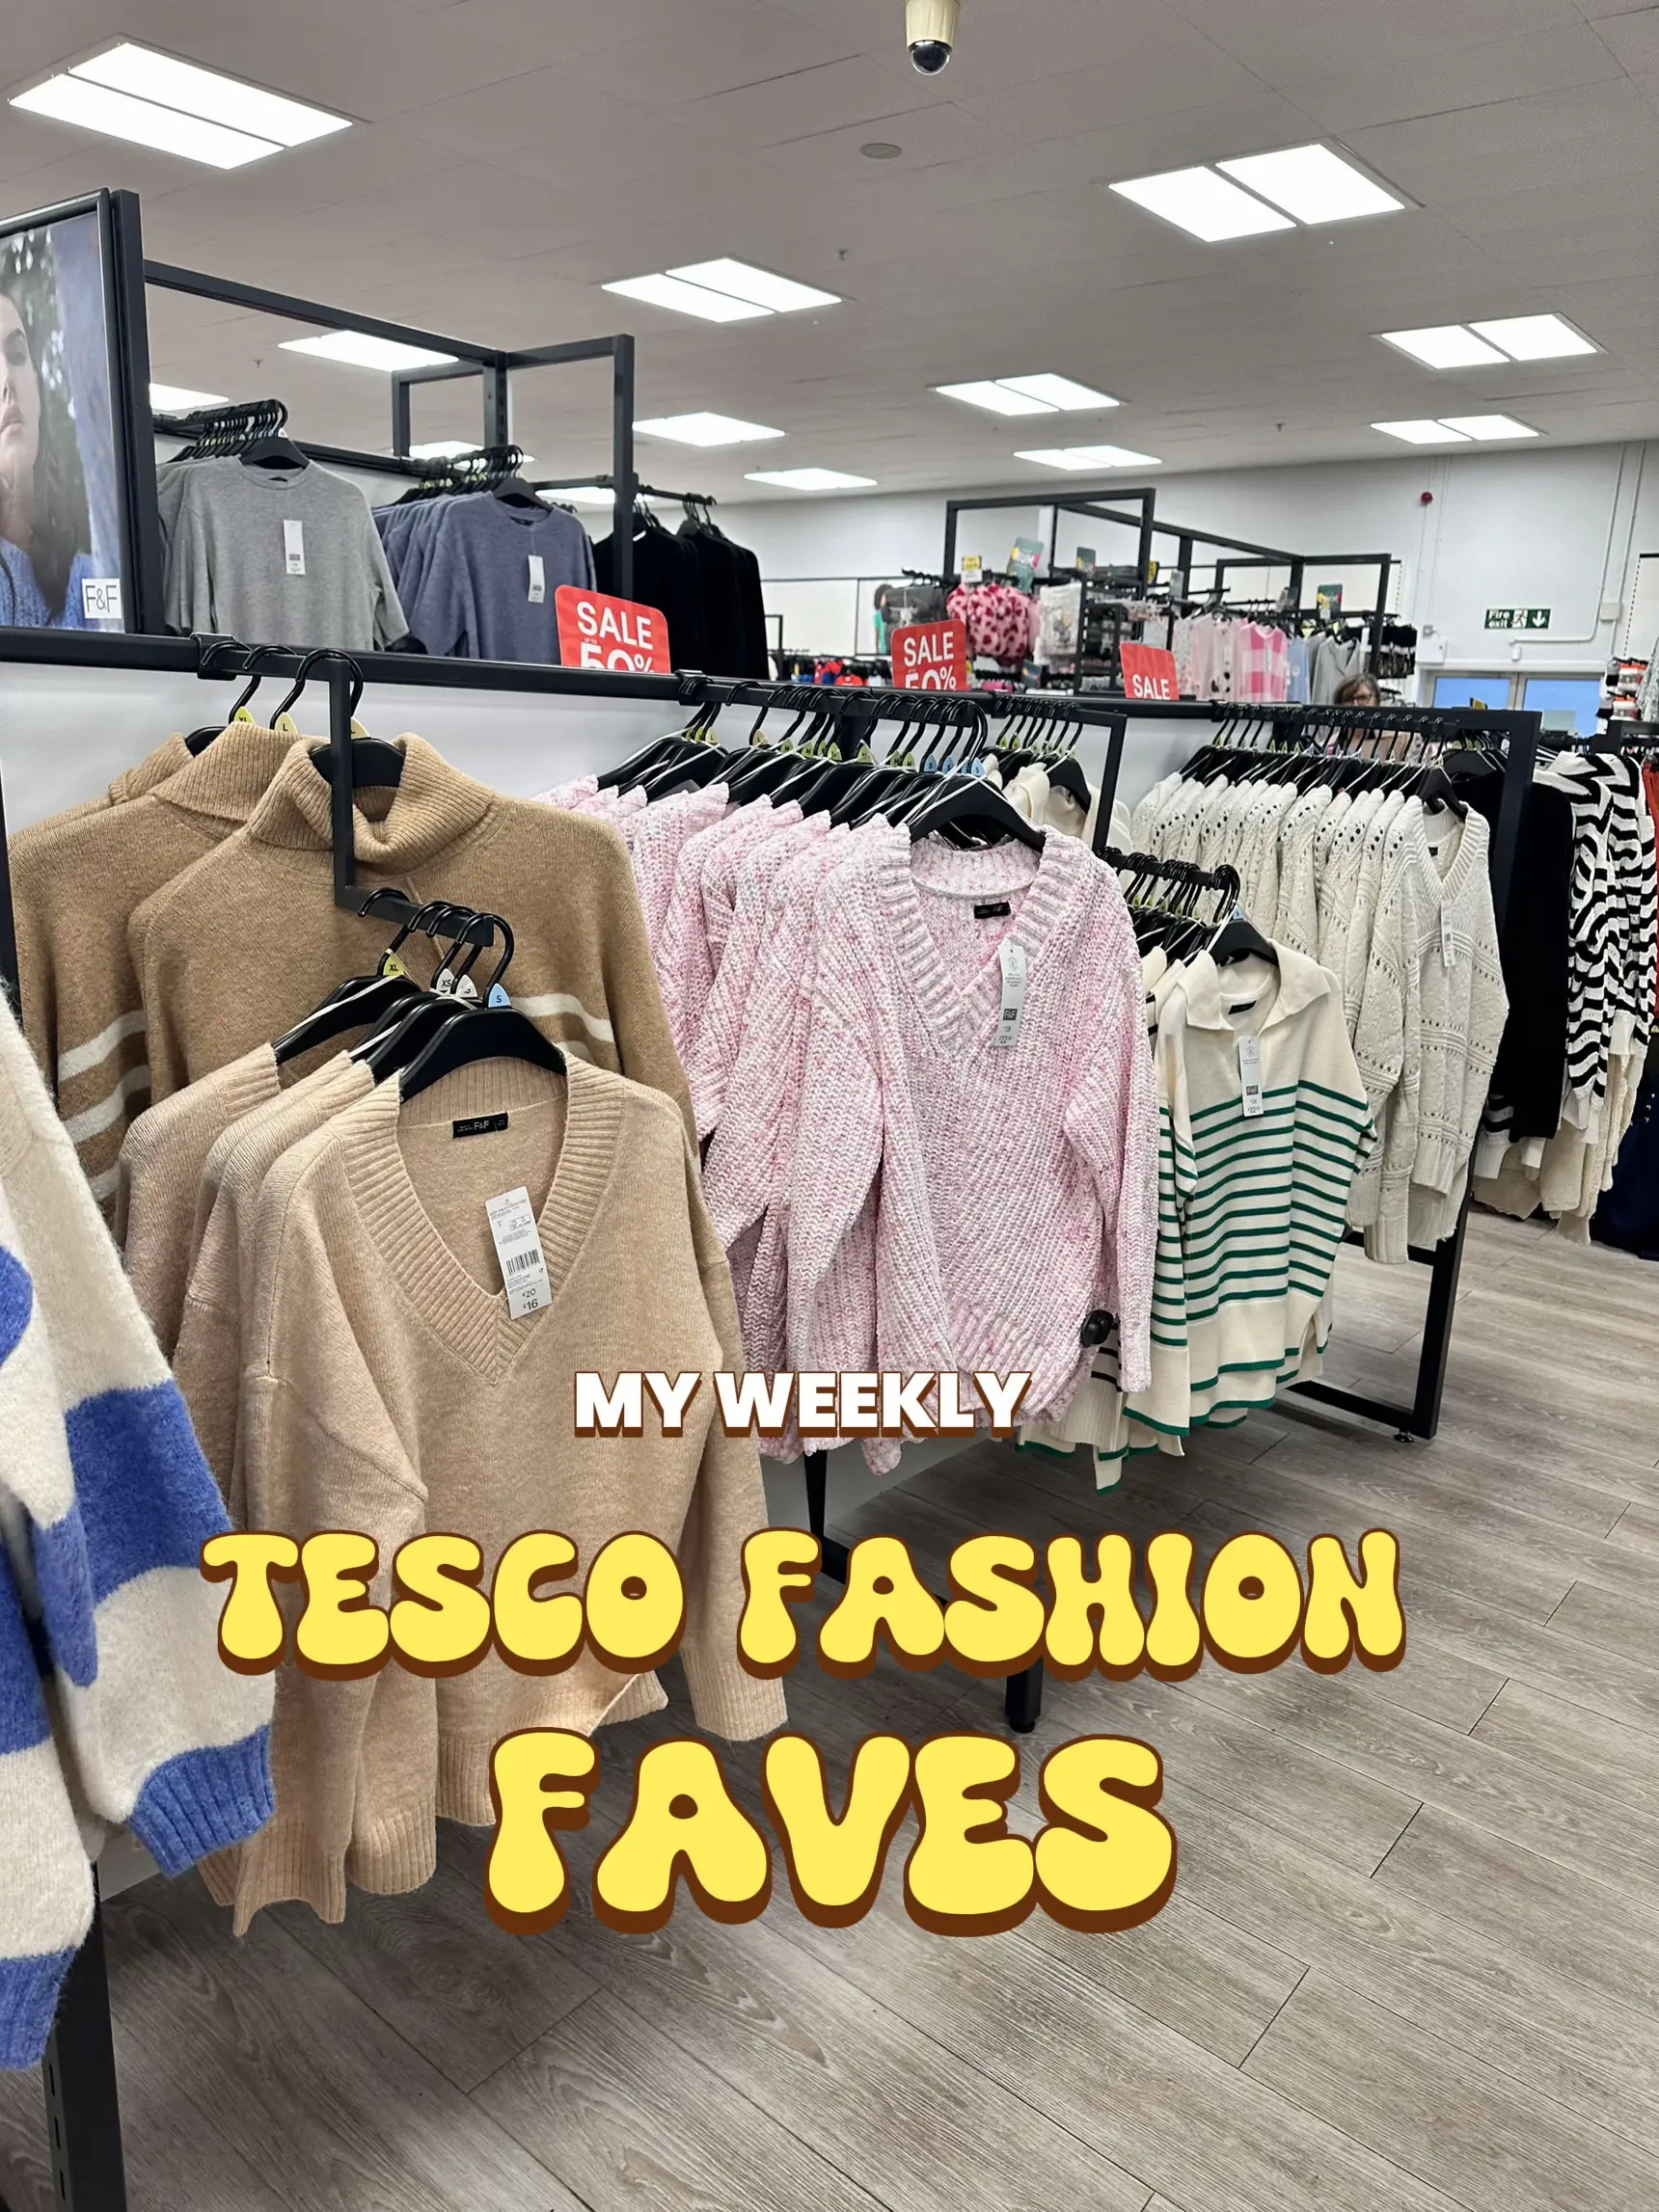 25% off Tesco F&F Clothing - with Clubcard - Instore Only - 1 Week